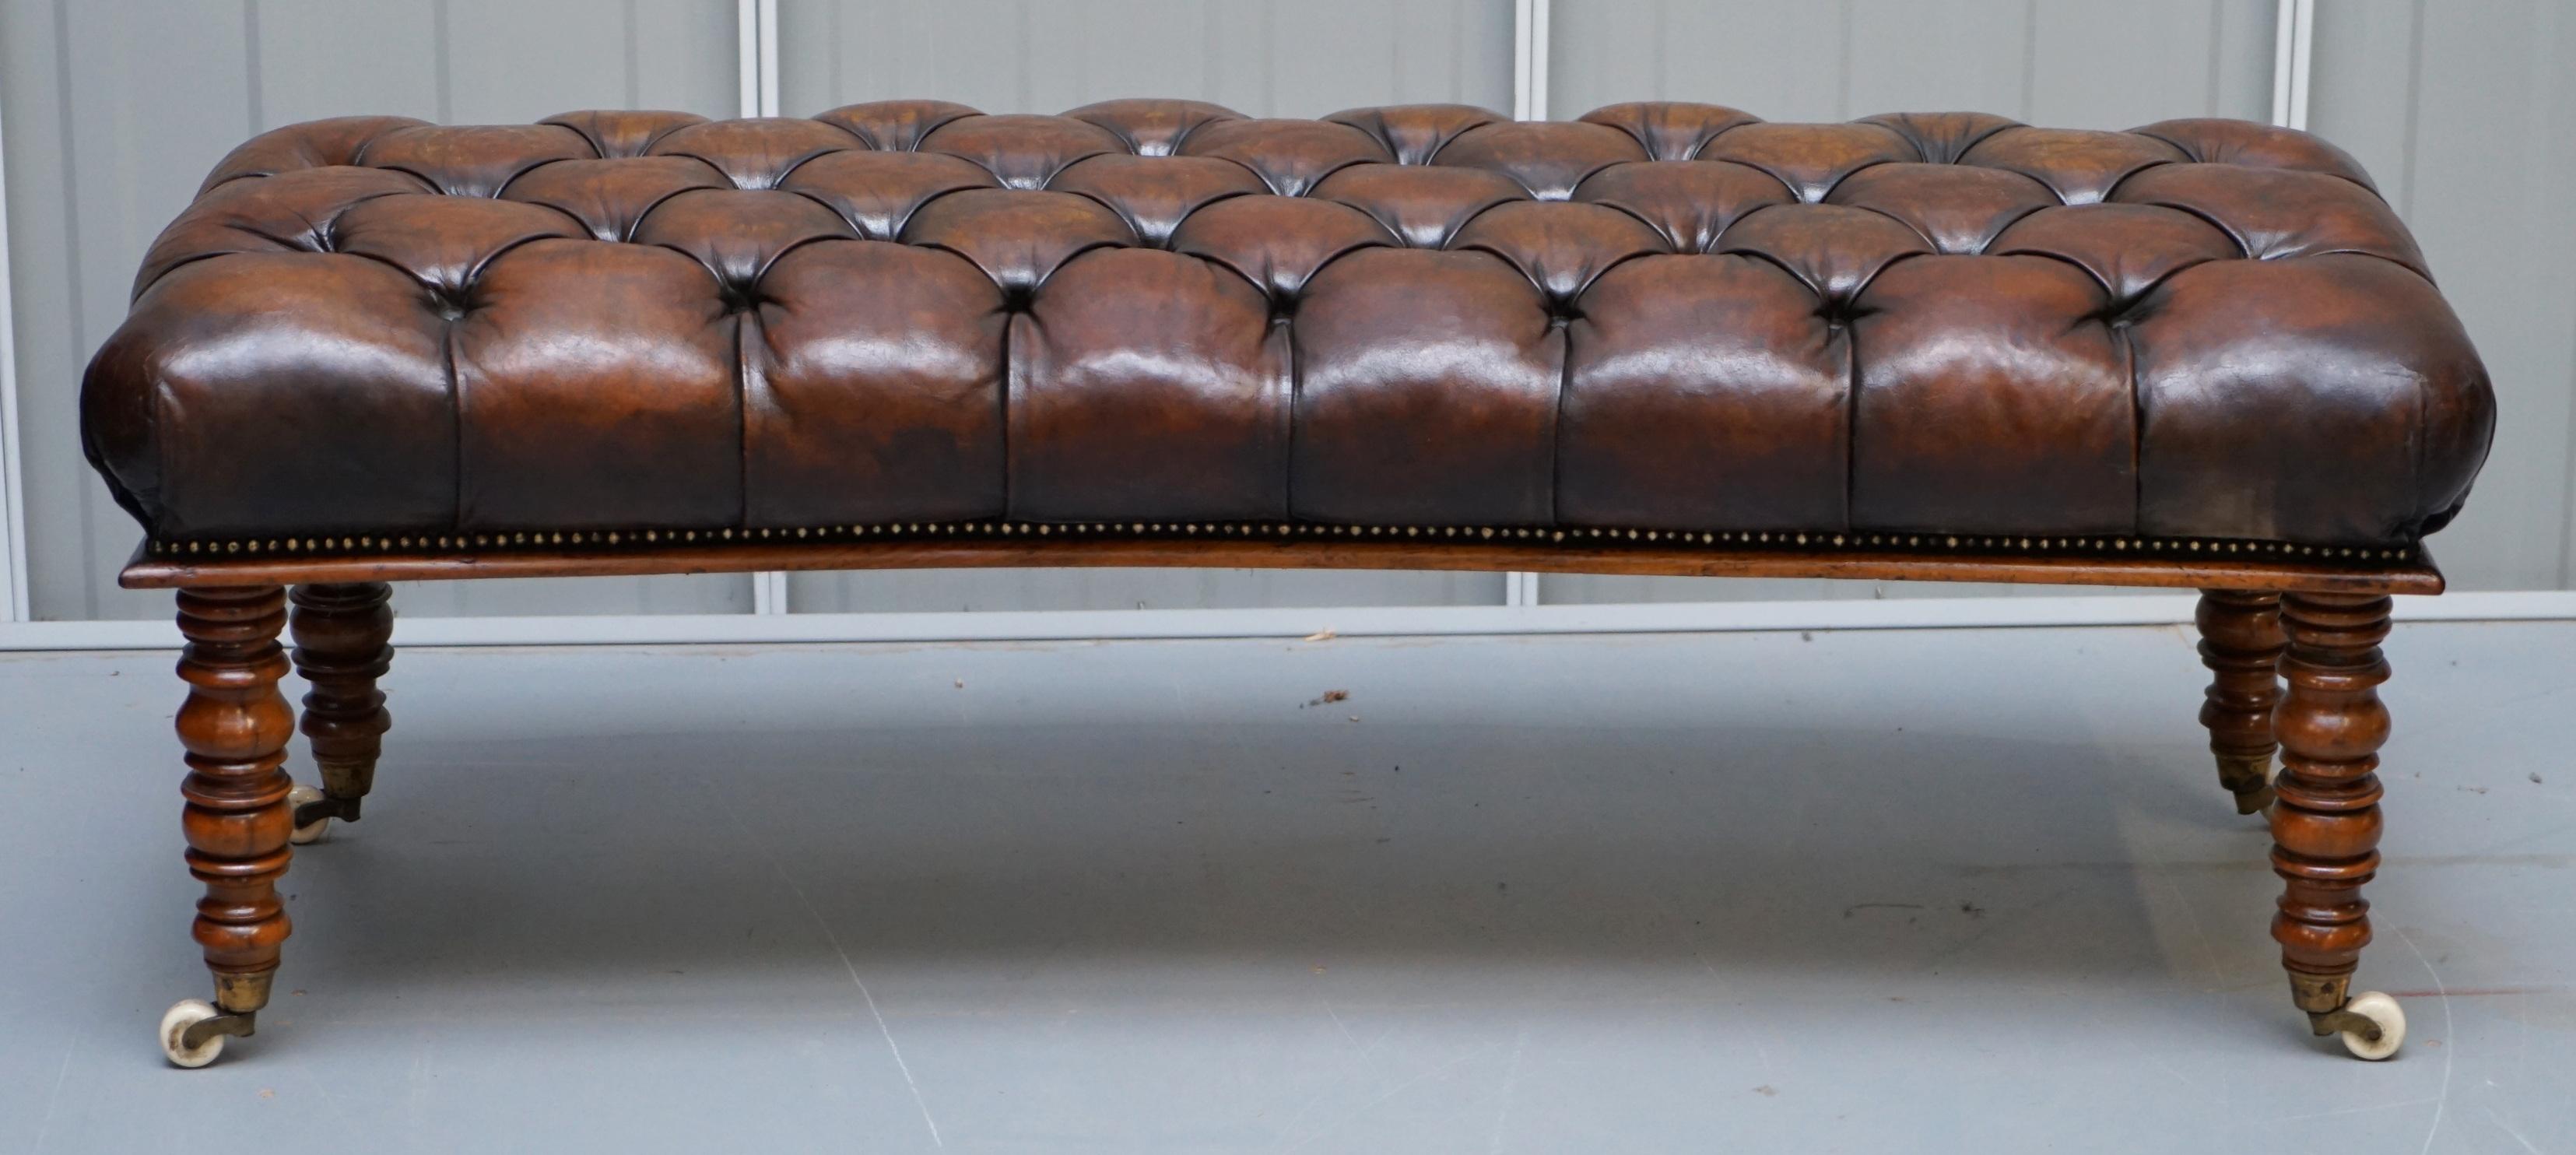 We are delighted to offer for sale this stunning original Regency curved frame solid walnut hand dyed brown leather bench stool

An absolutely stunning find, designed to sit in a bay window due to the slight curve, I would imagine its equally